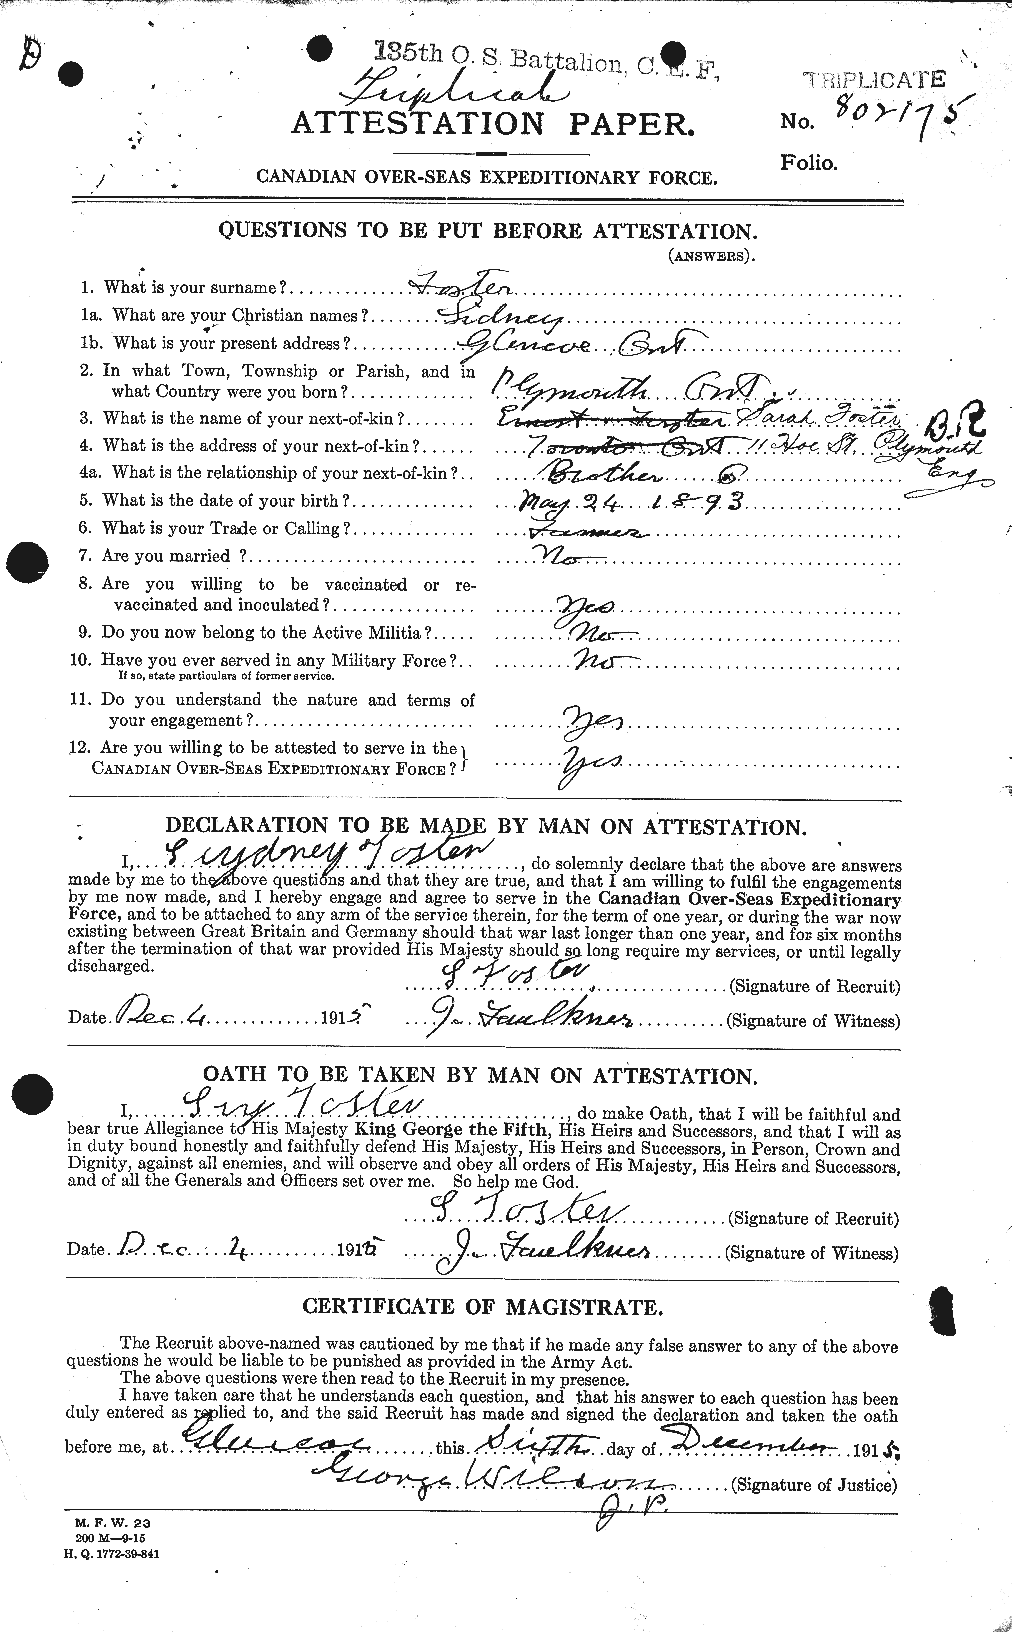 Personnel Records of the First World War - CEF 335210a